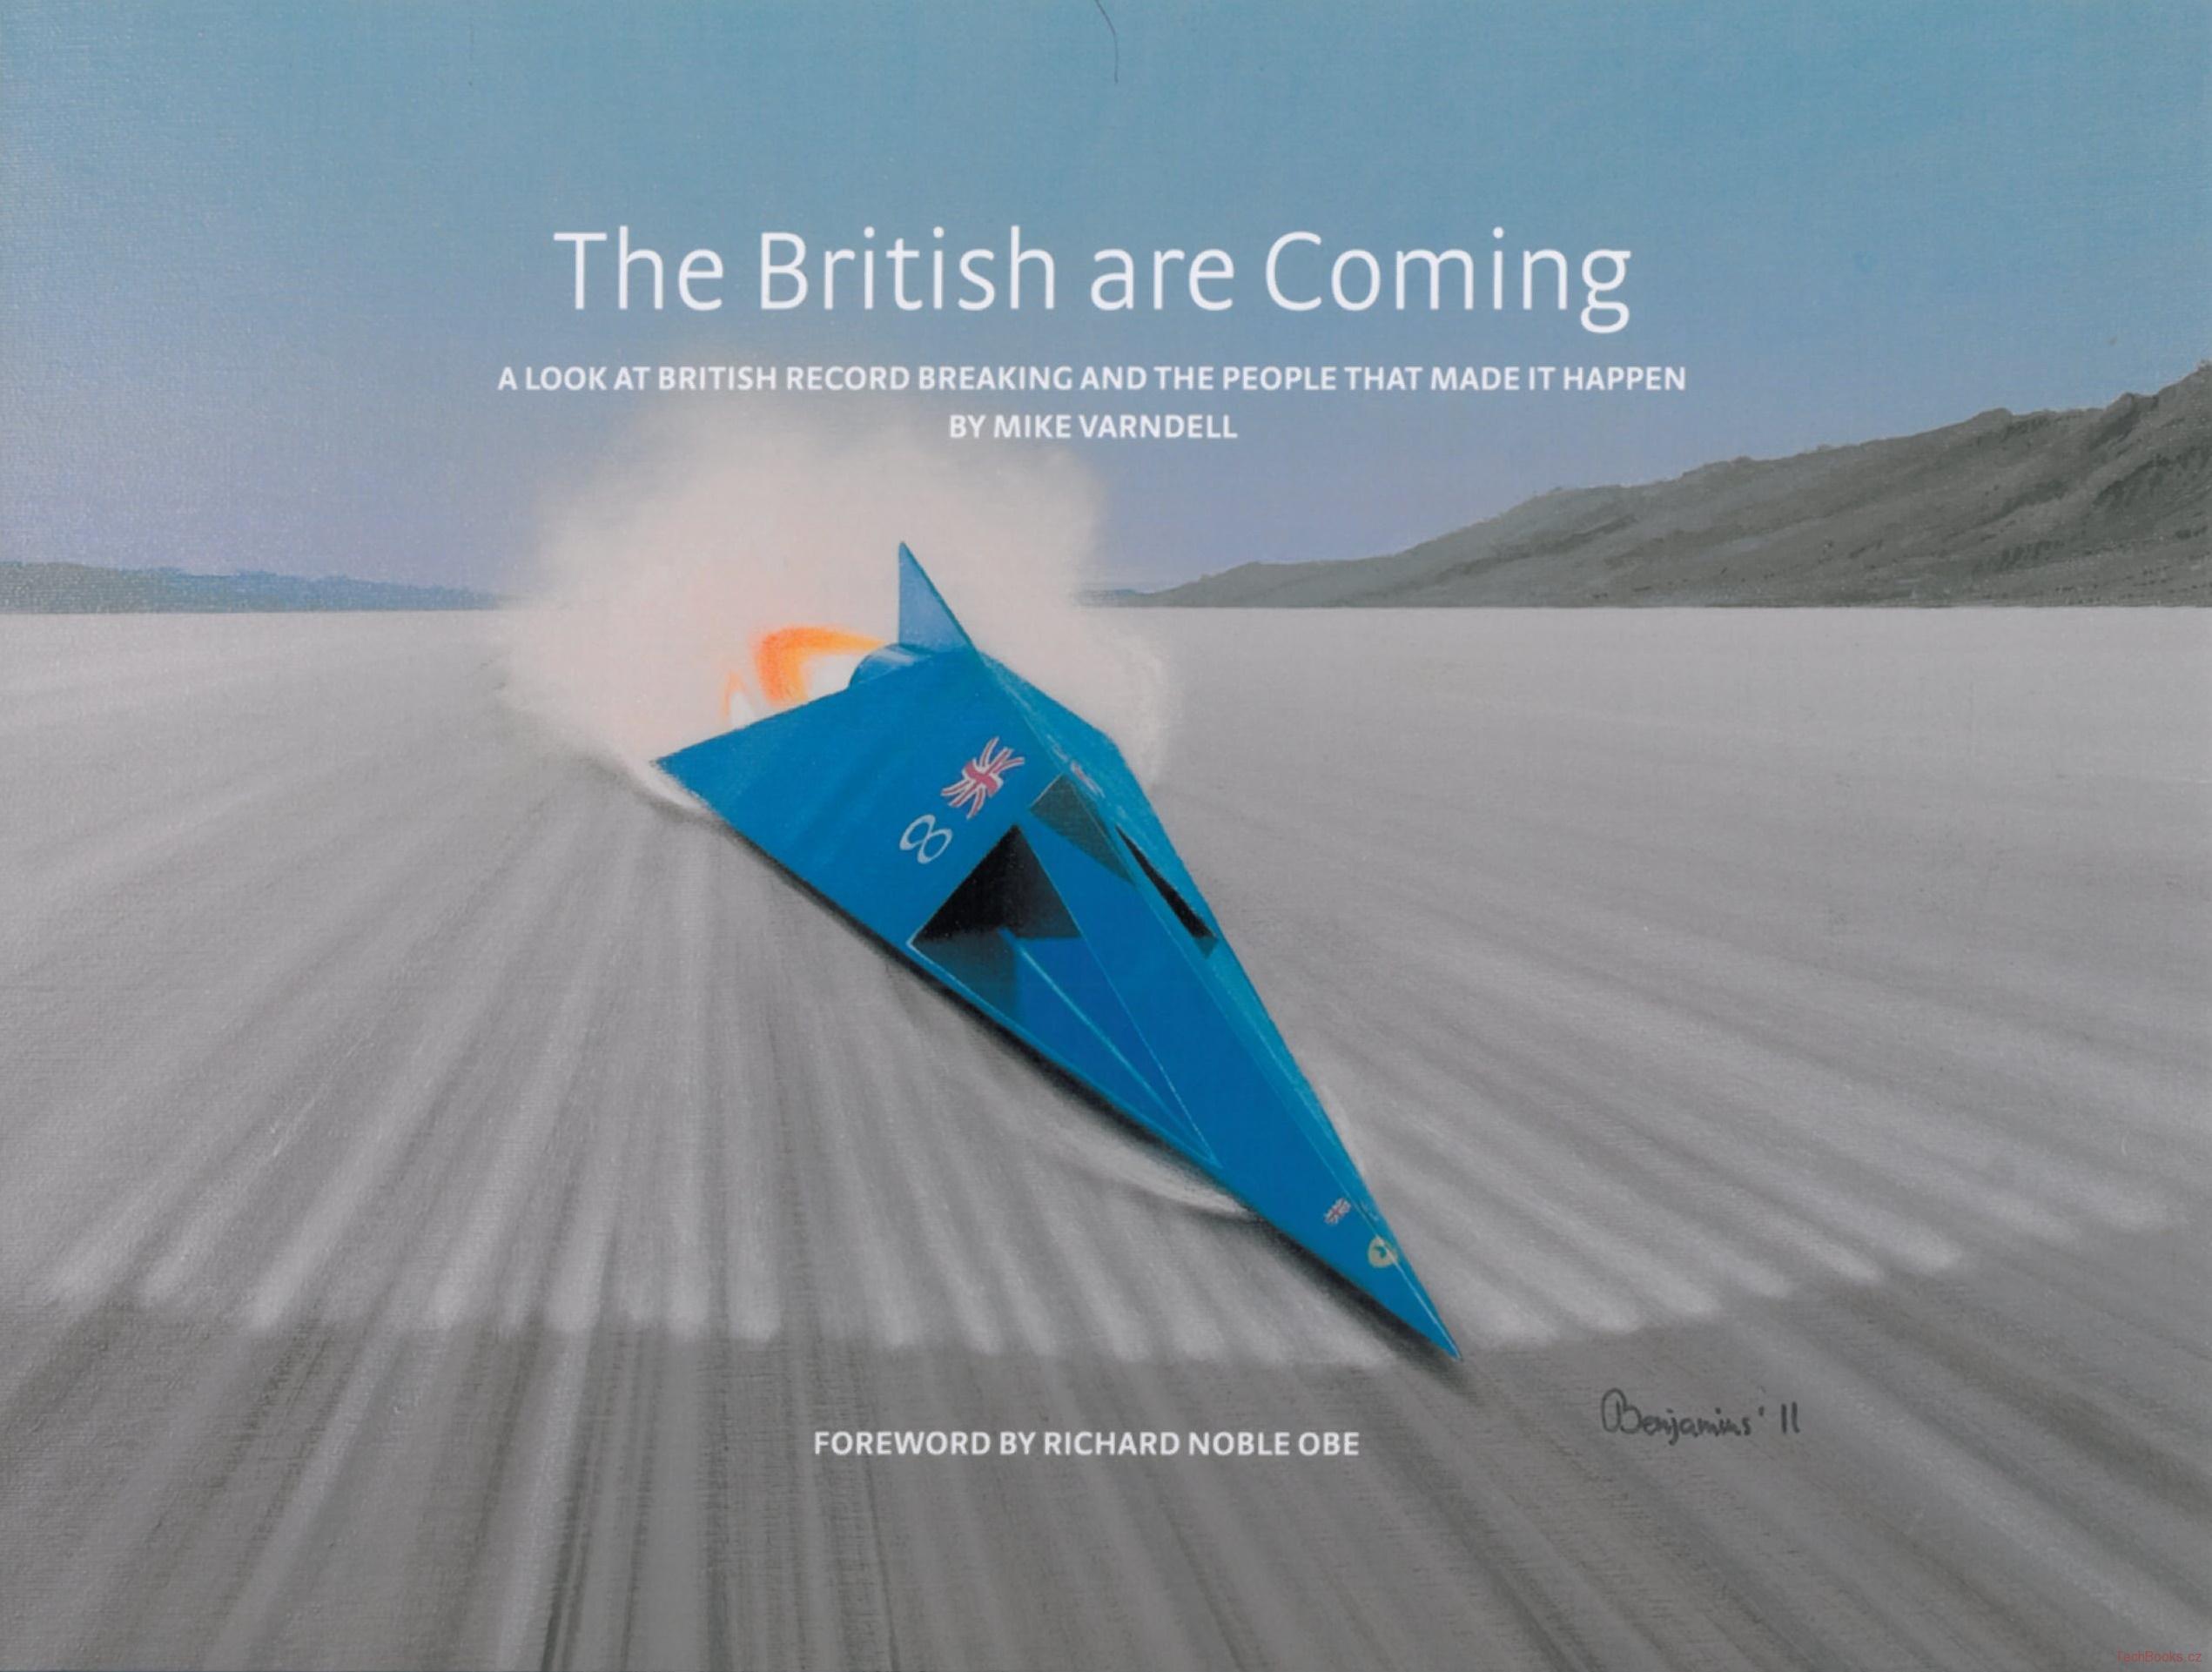 The British are Coming